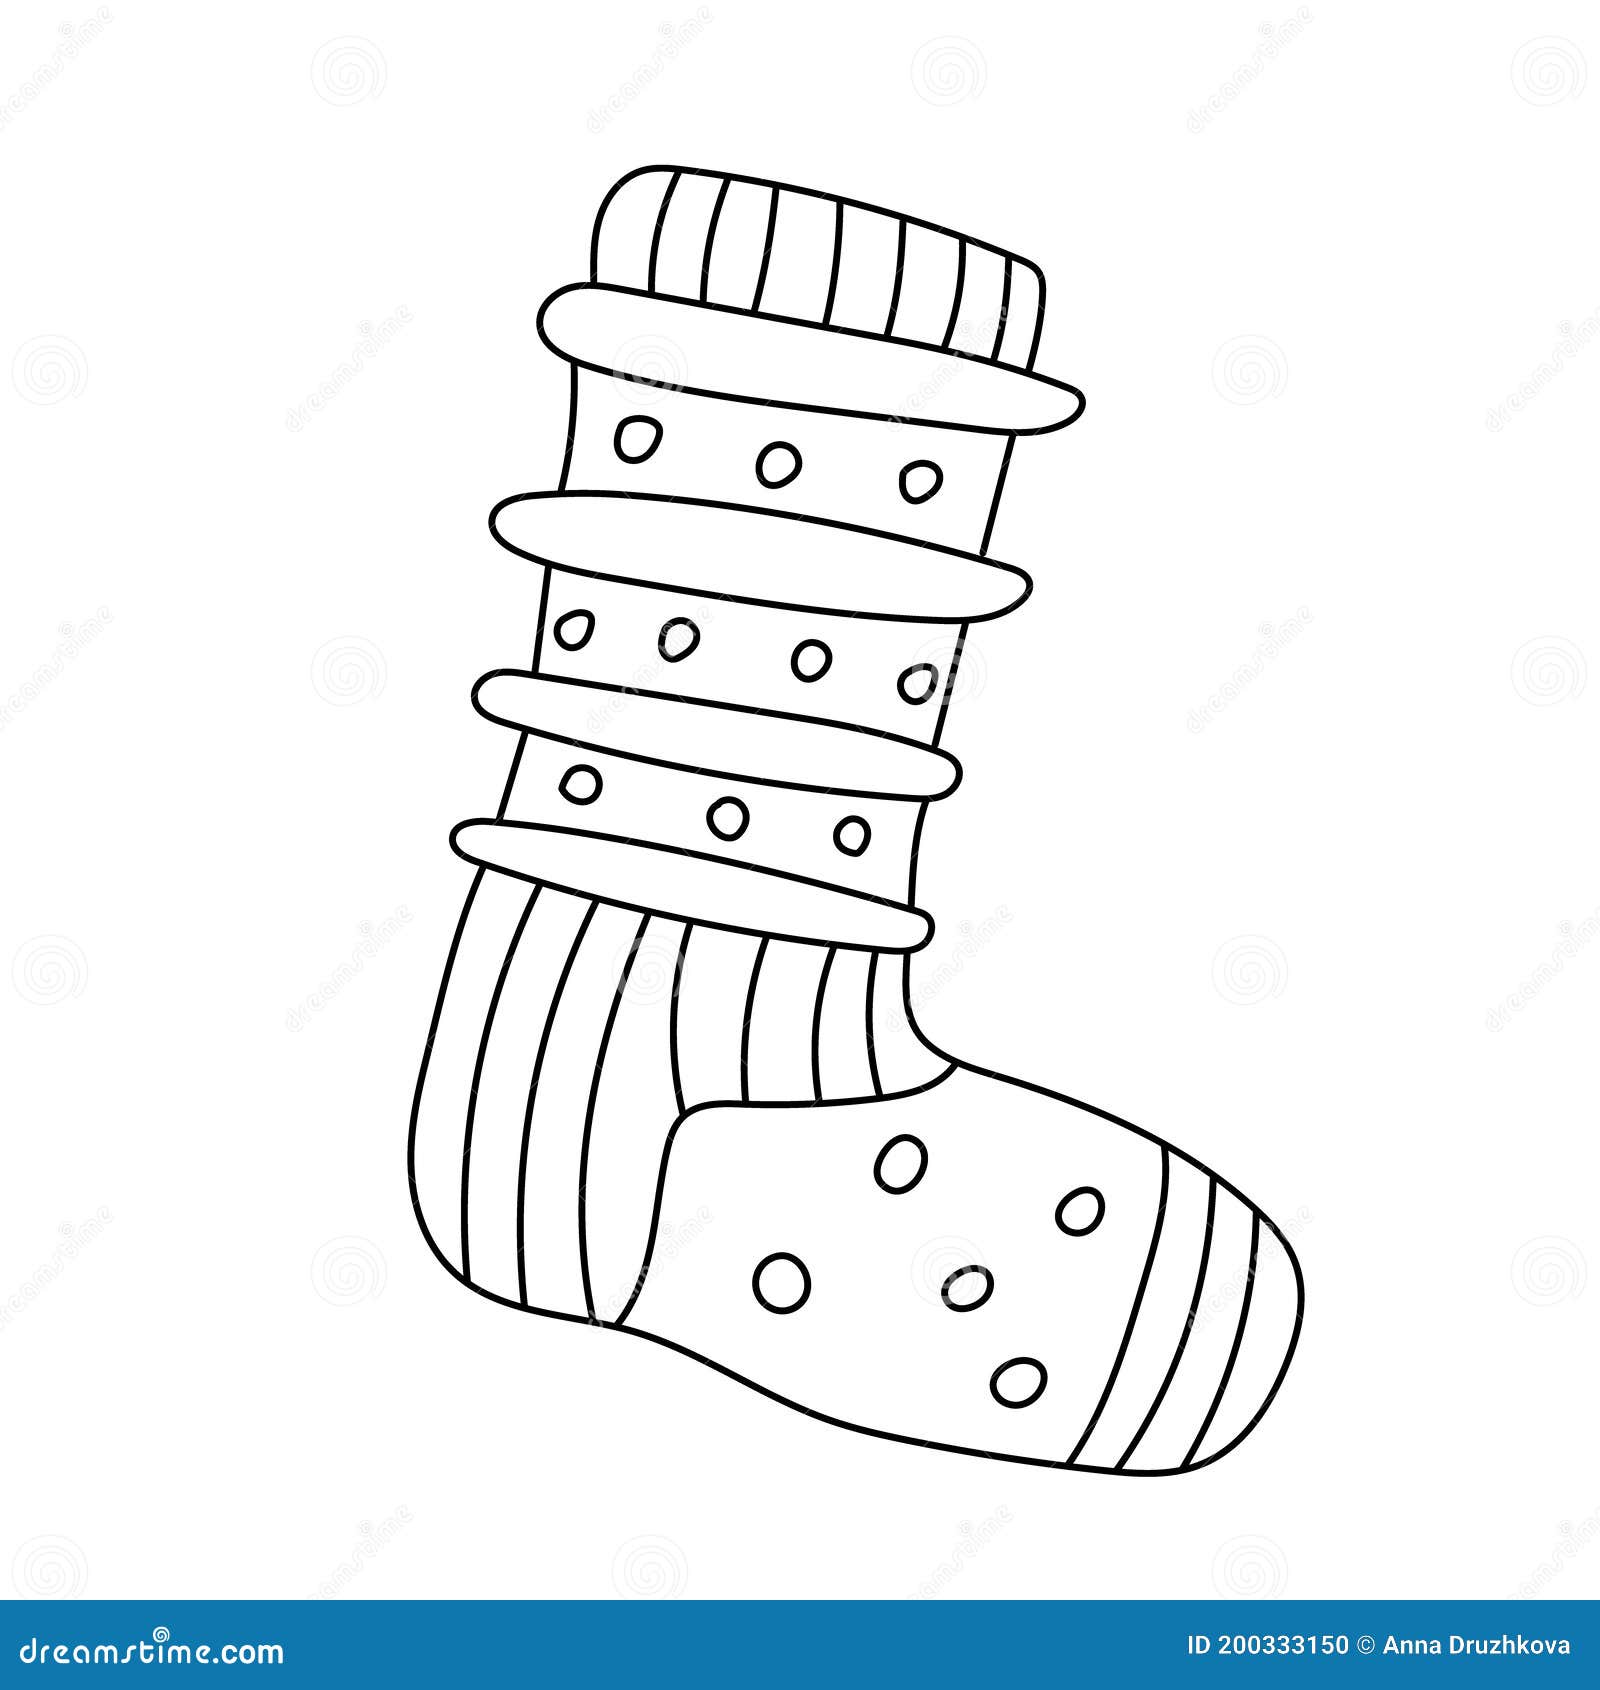 Cute Striped Sock in Doodle Sketch Style. Stock Vector - Illustration ...